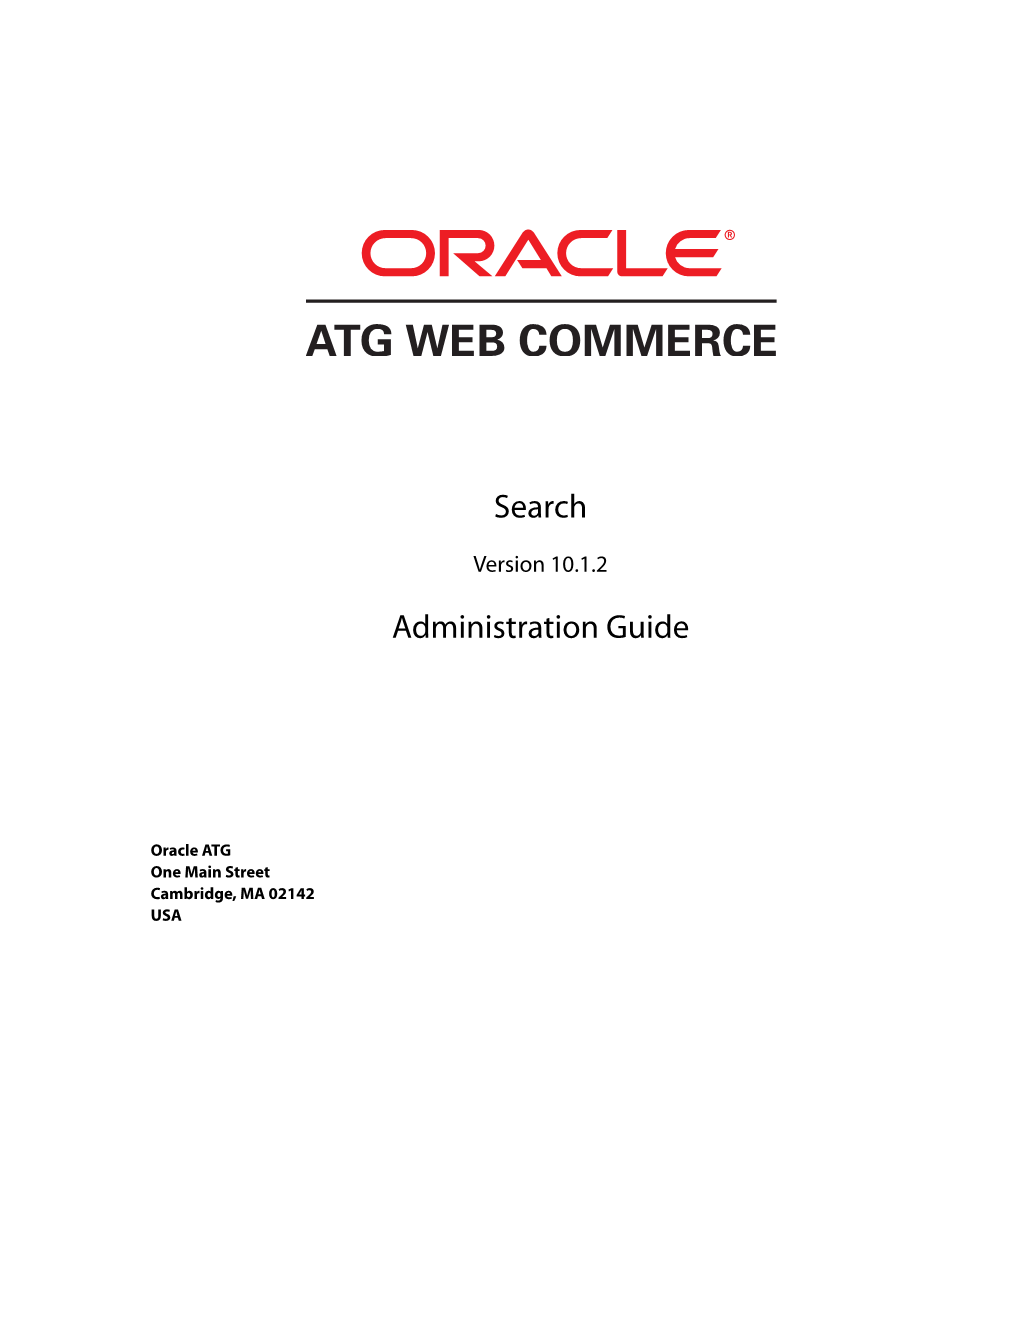 ATG Search Administration Guide